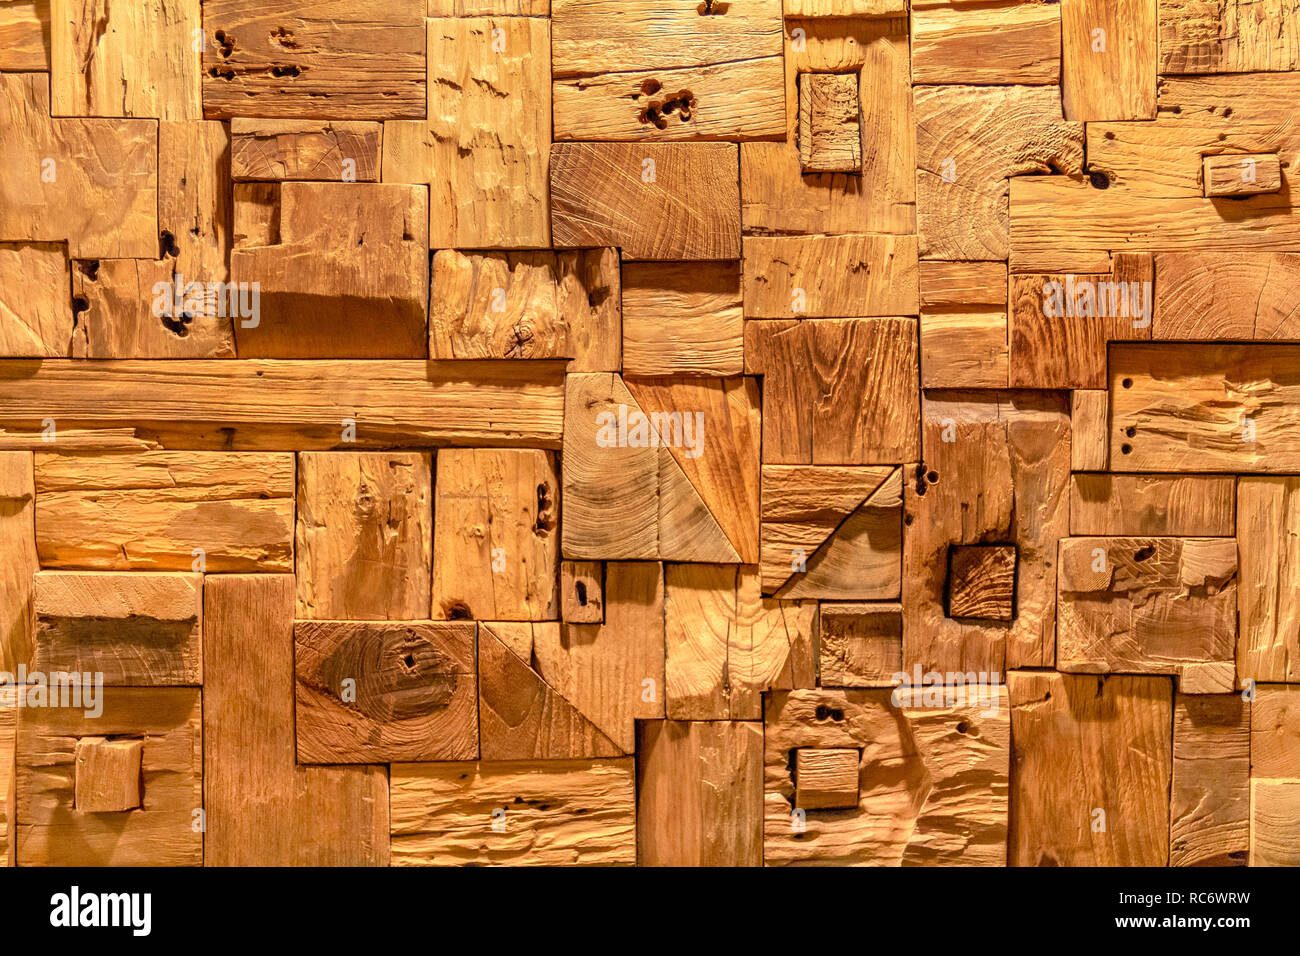 full frame detail of a interlocked wooden construction Stock Photo